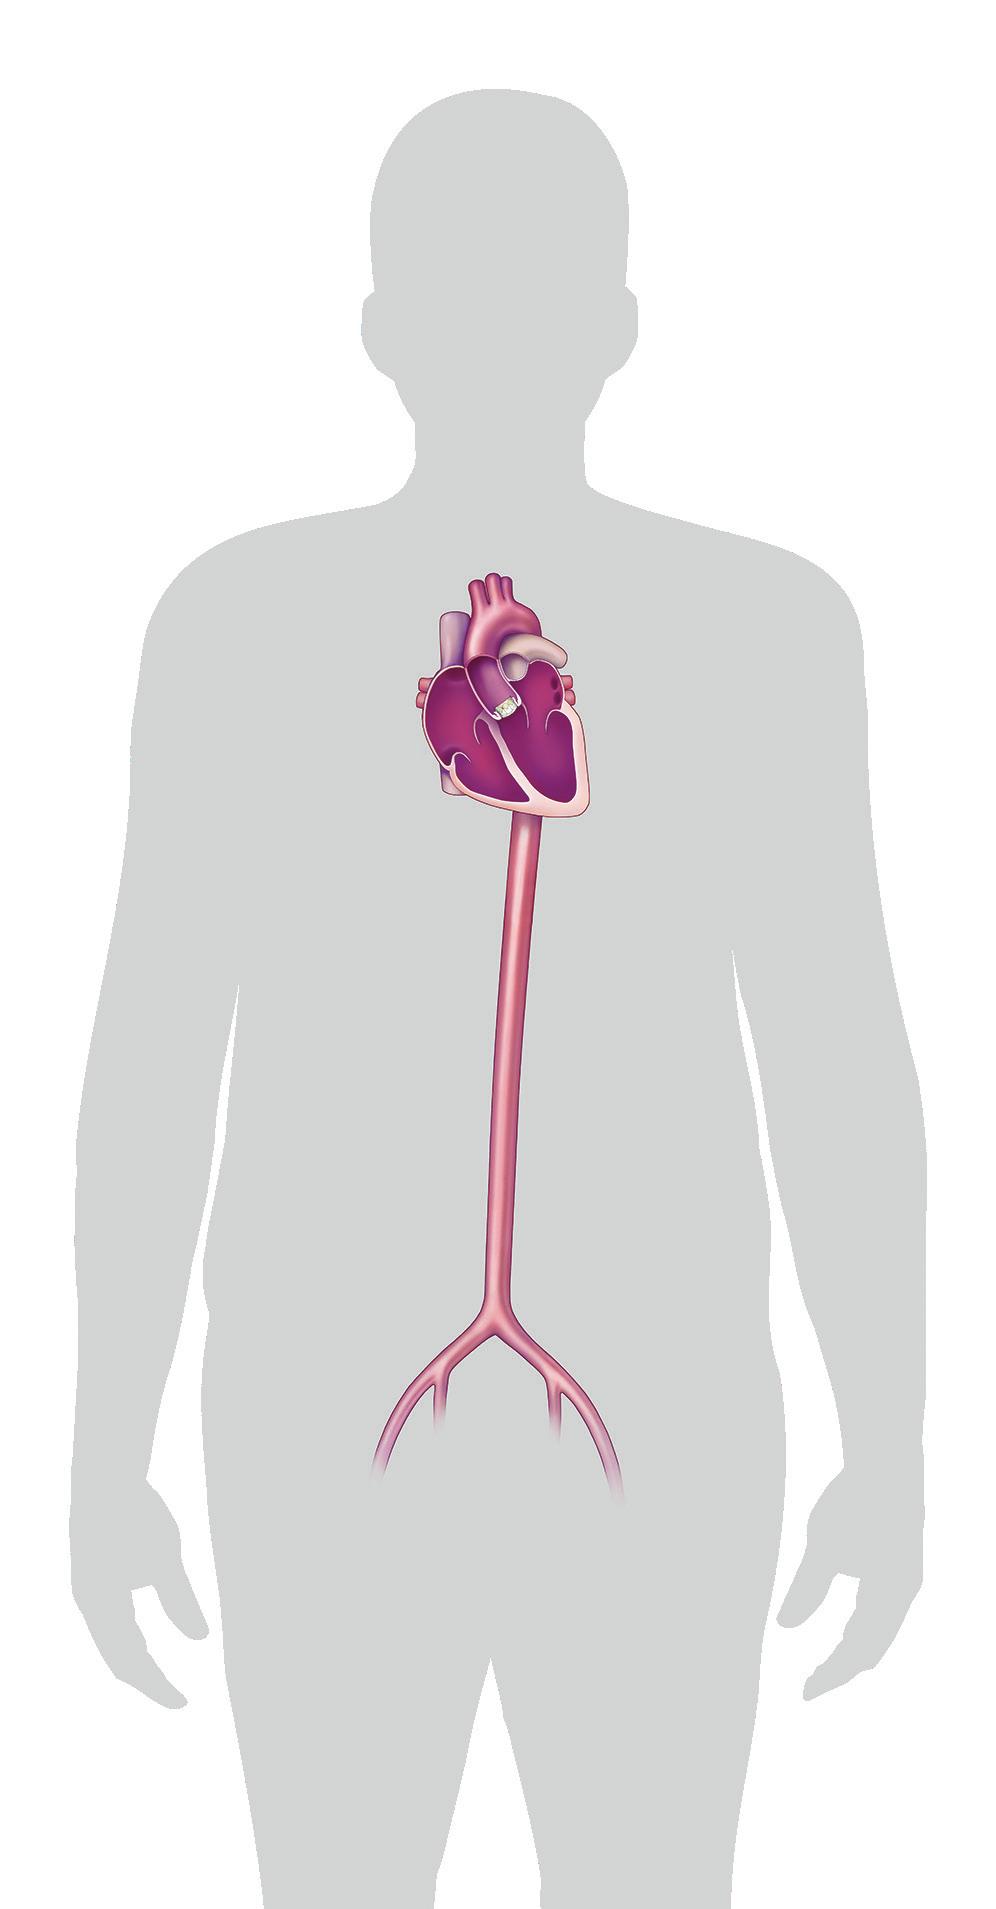 Transcatheter approach It is possible to replace the aortic valve using a catheter. This approach is called transcatheter aortic valve replacement (TAVR).